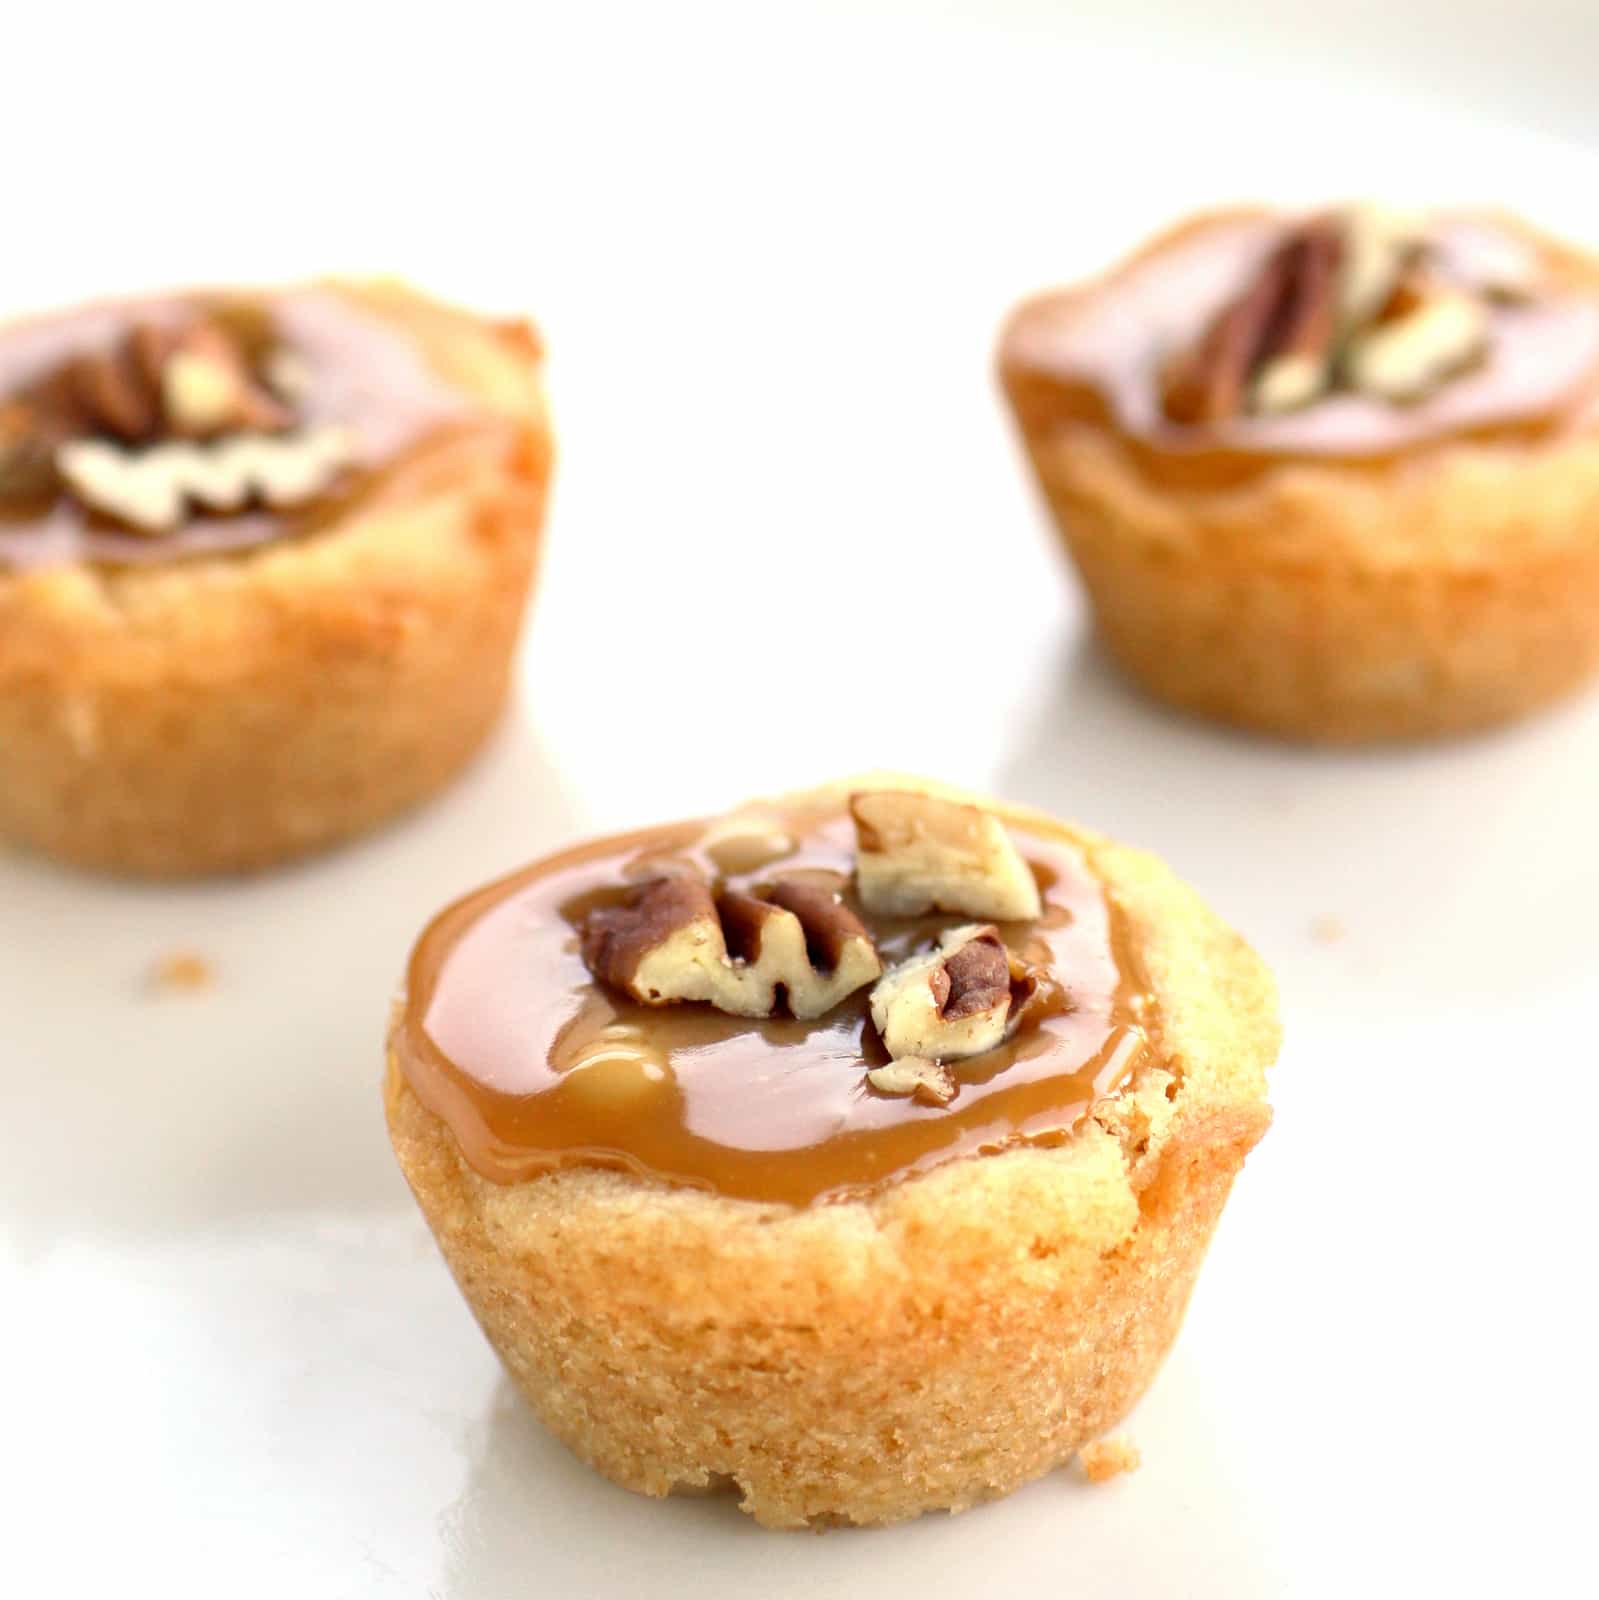 Turtle Tassies - Caramel, chocolate, and nuts in a sugar cookie cup. the-girl-who-ate-everything.com